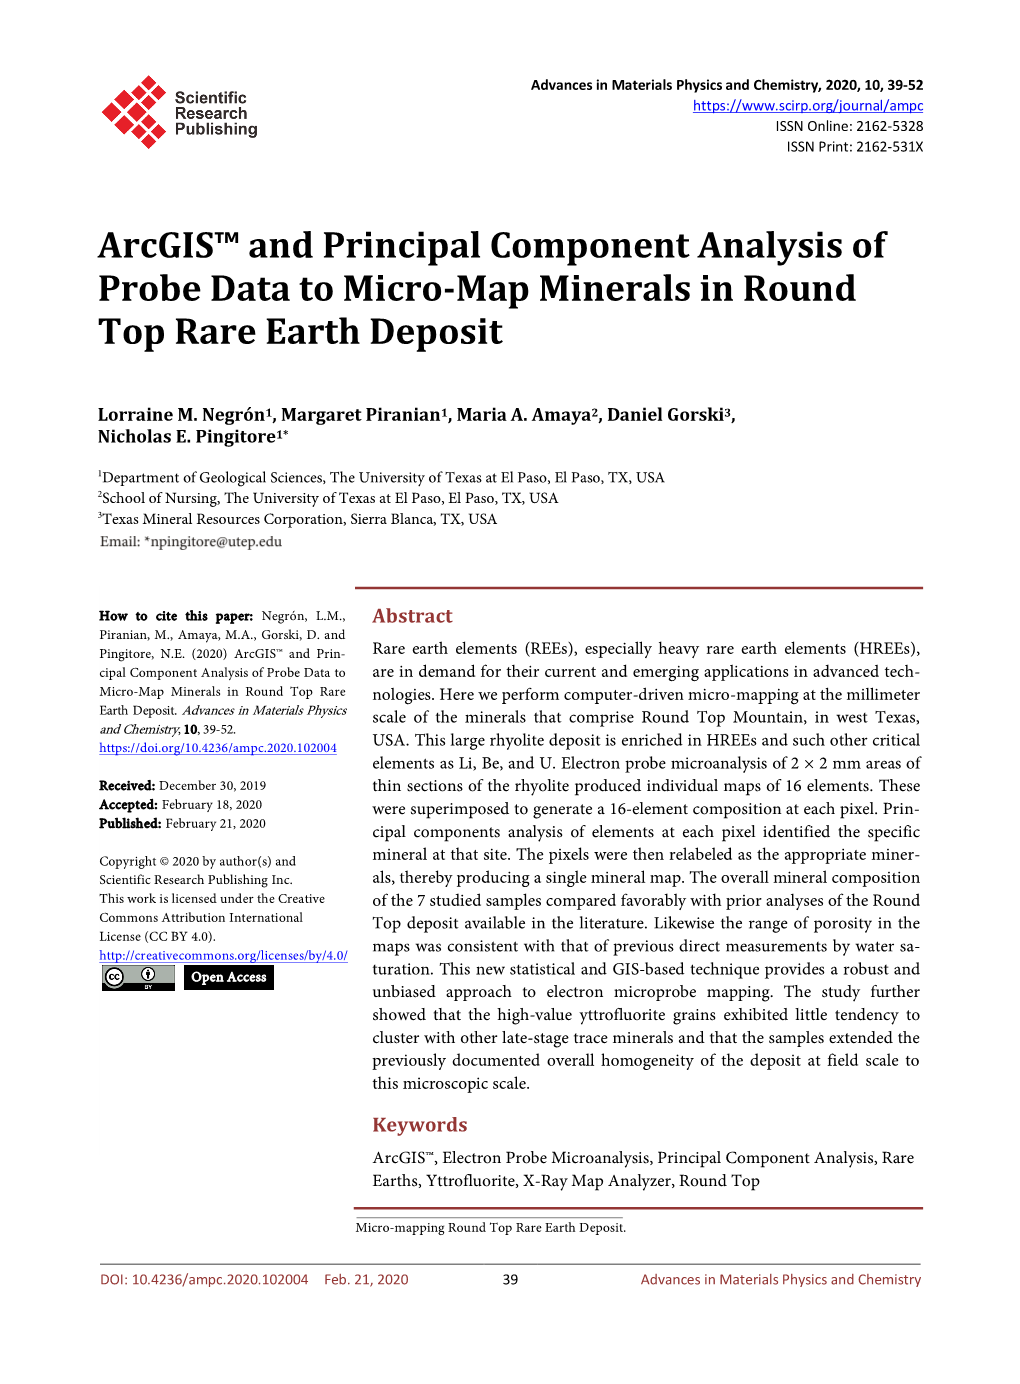 Arcgis™ and Principal Component Analysis of Probe Data to Micro-Map Minerals in Round Top Rare Earth Deposit